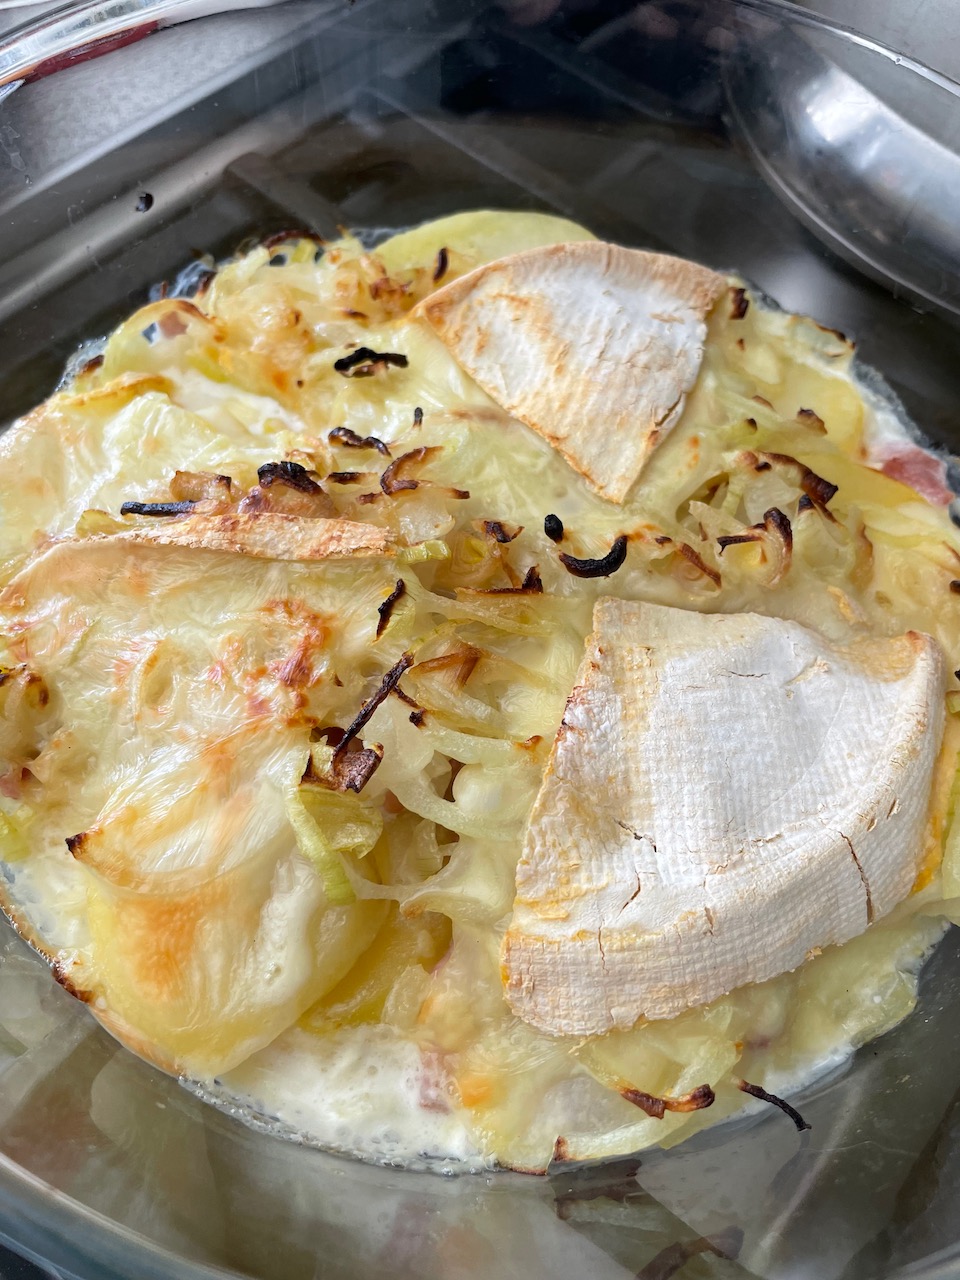 Tartiflette cheese dish - great dish in case you run into cold temperature in Paris in December